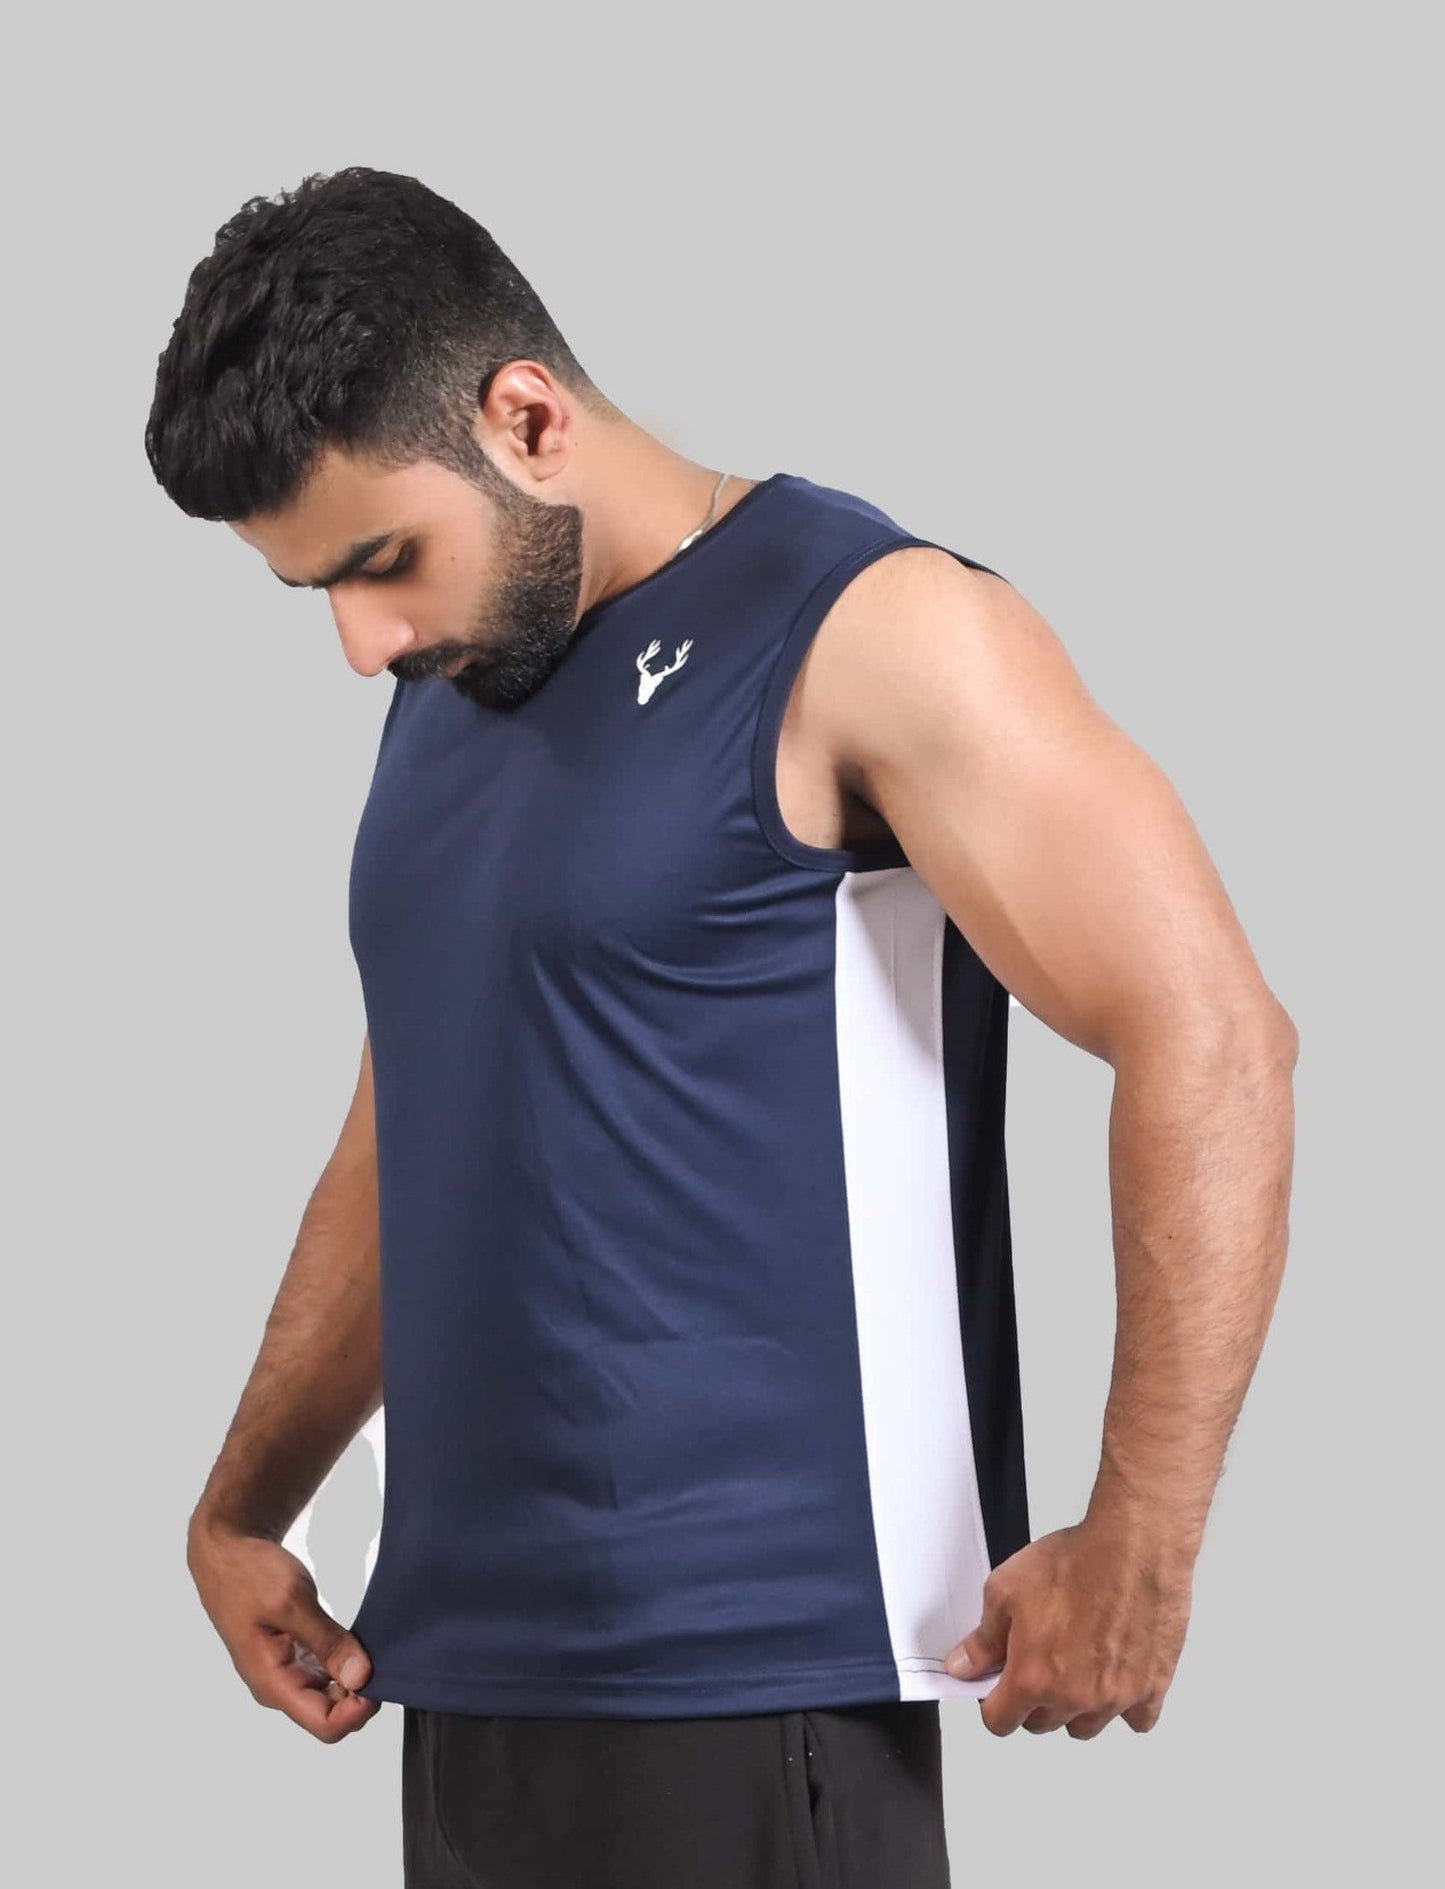 Performance Tanktop (NAVY BLUE & WHITE) - Stag Clothing 